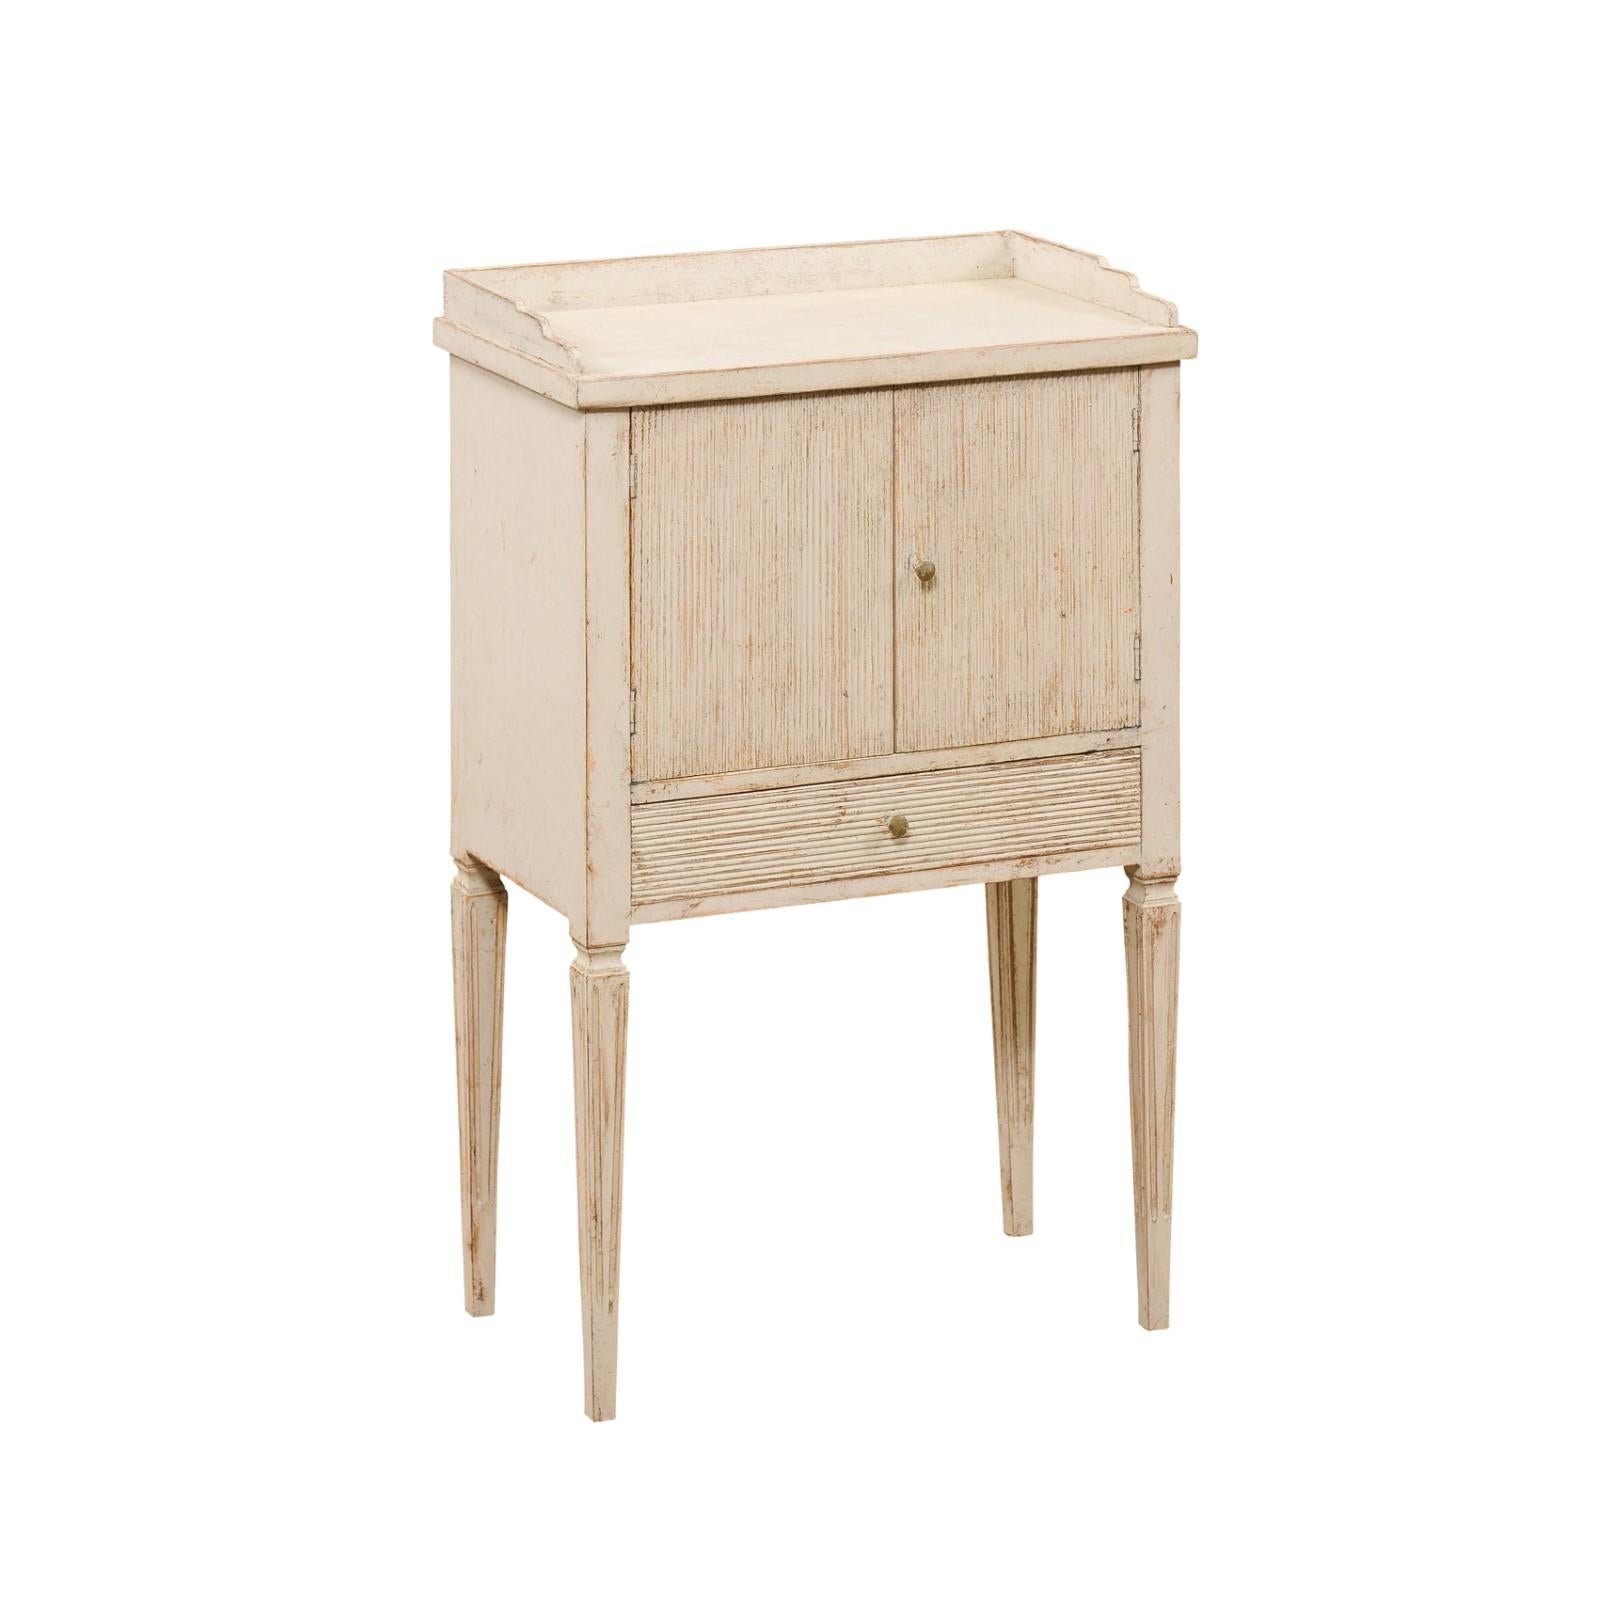 A Swedish Gustavian style painted wood nightstand from the mid 19th century with reeded doors, low drawer, carved gallery and tapered legs. Created in Sweden during the 1850s, this painted bedside table features a rectangular top with three-quarter